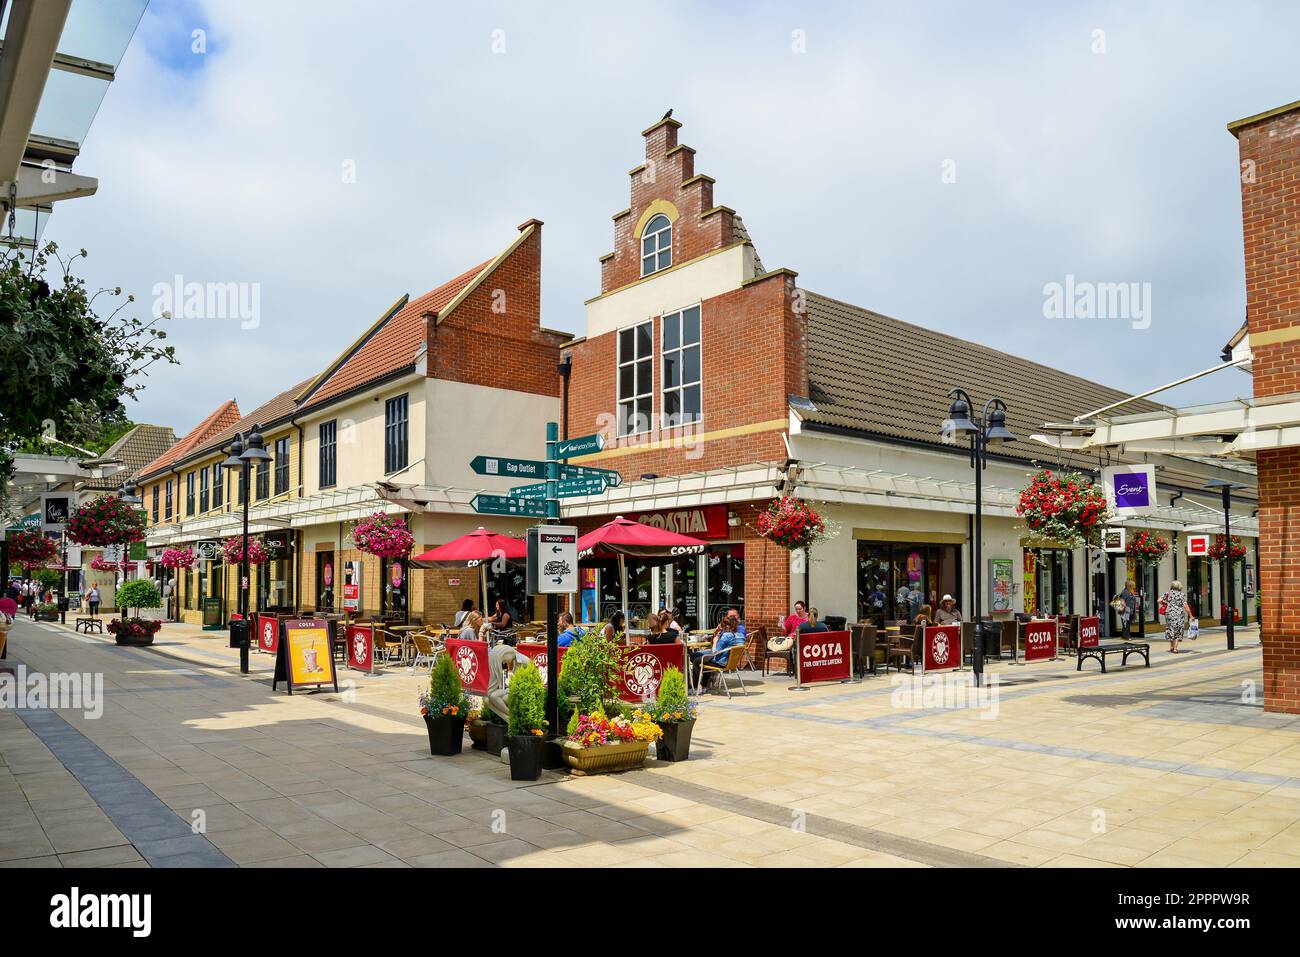 Springfields Outlet Shopping & Festival Gardens, Camelgate, Spalding, Lincolnshire, England, United Kingdom Stock Photo